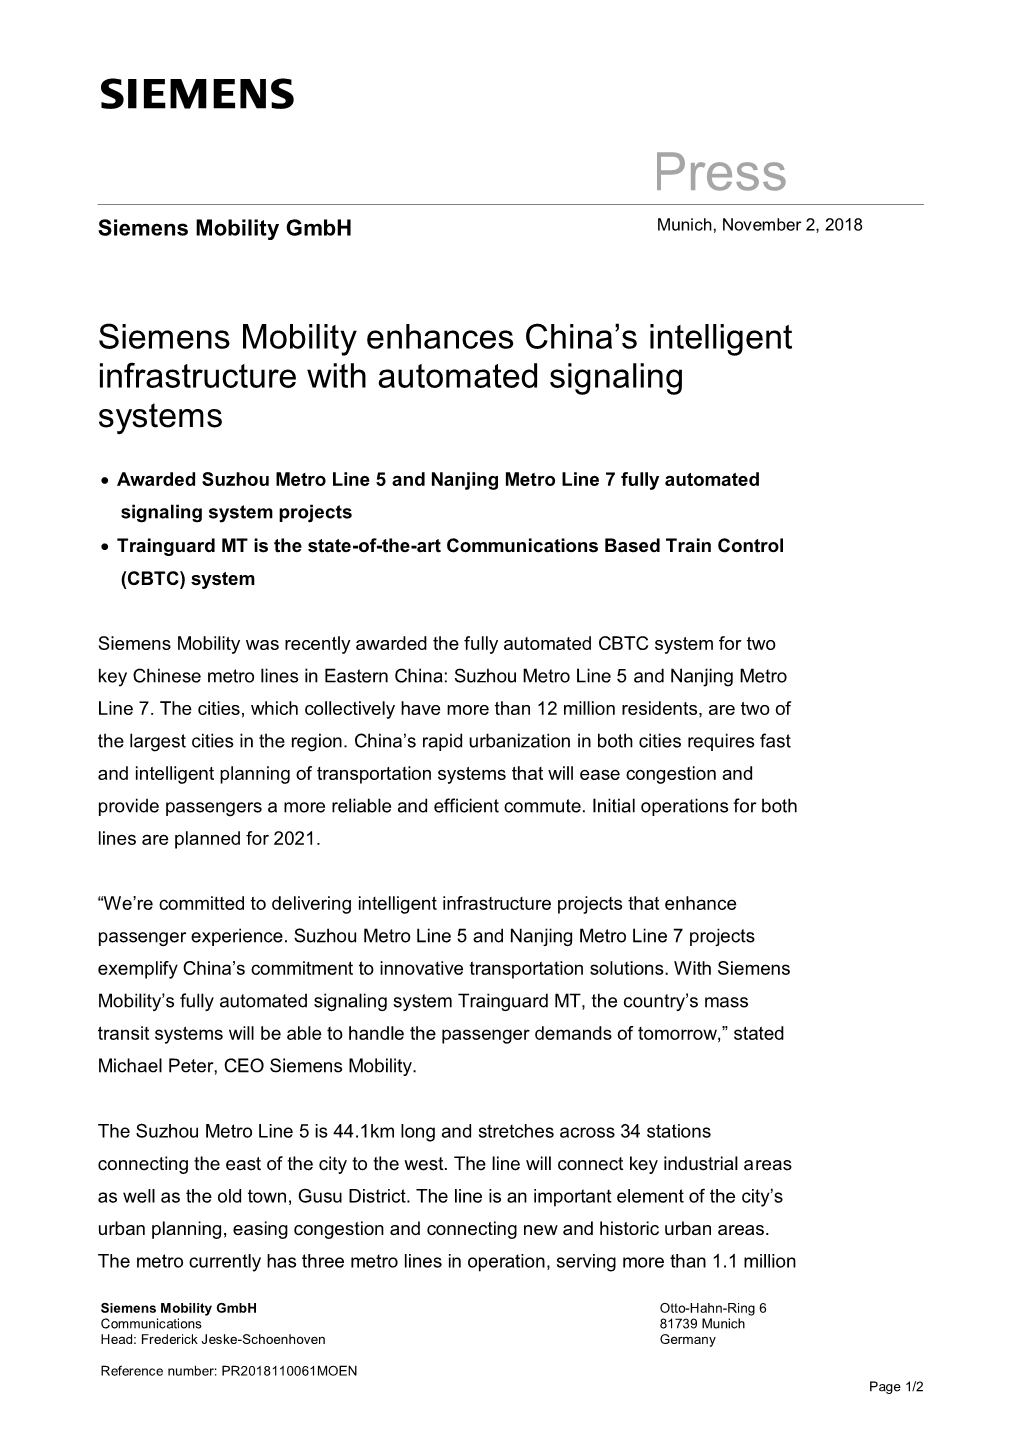 Siemens Mobility Enhances China's Intelligent Infrastructure With